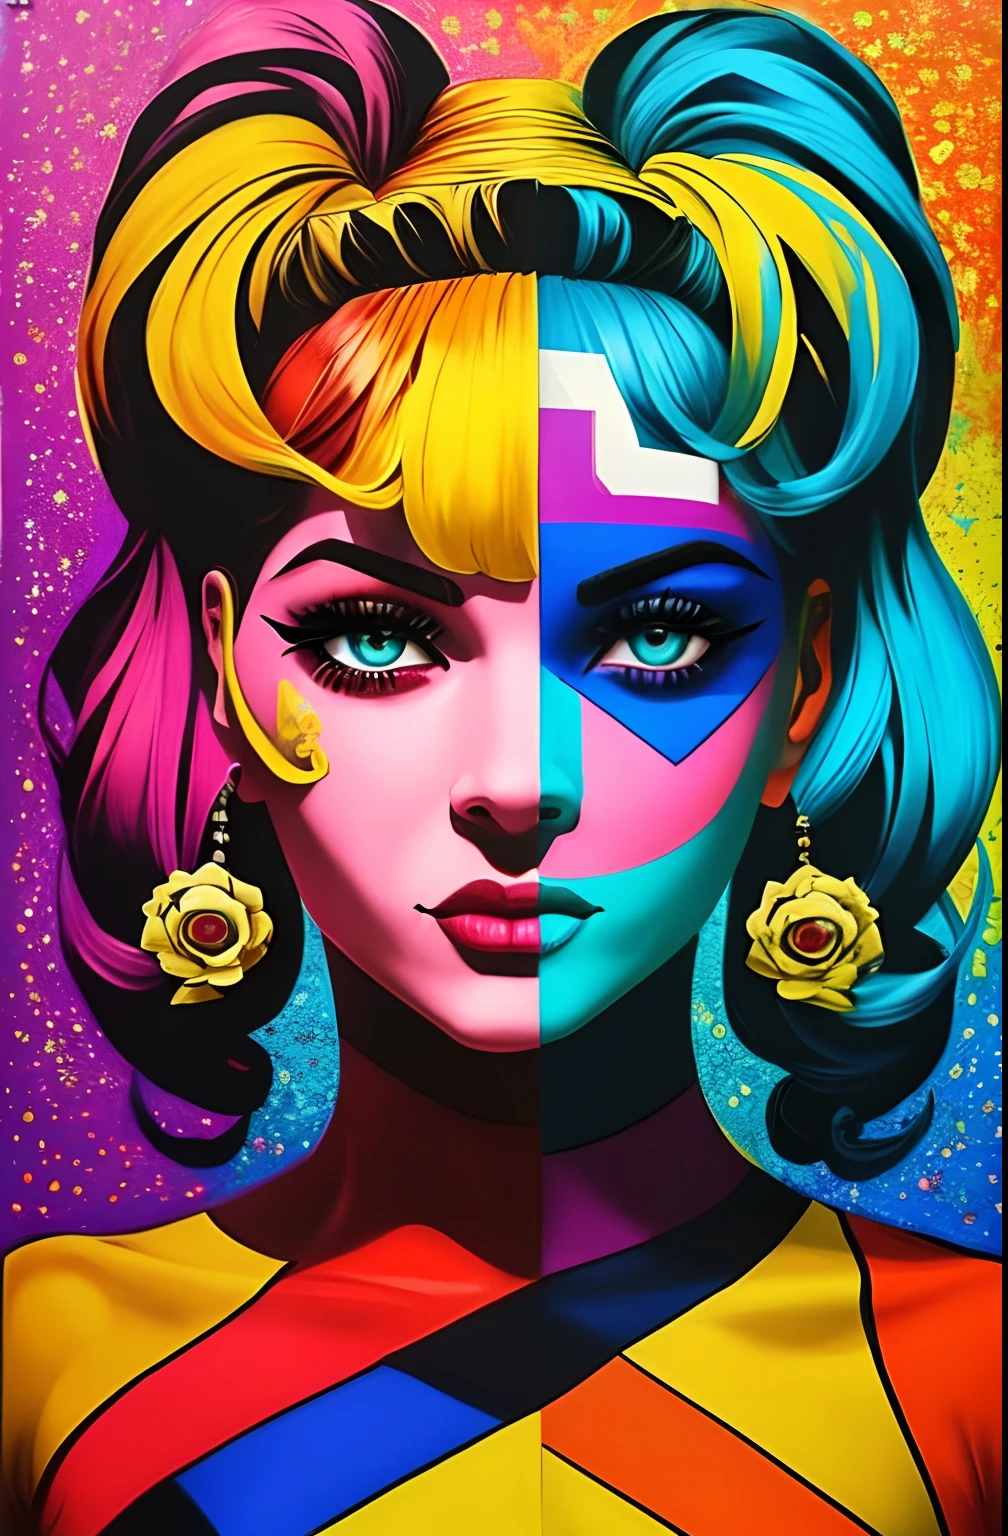 ( madonna),  Eduardo Kobra ,Romero Brito,The Filling Twins ,multidimensional geometric wall PORTRAIT, artistry, chibi,
yang08k, comely, Colouring,
Primary works, top-quality, best qualityer, offcial art, Beautiful and Aesthetic,